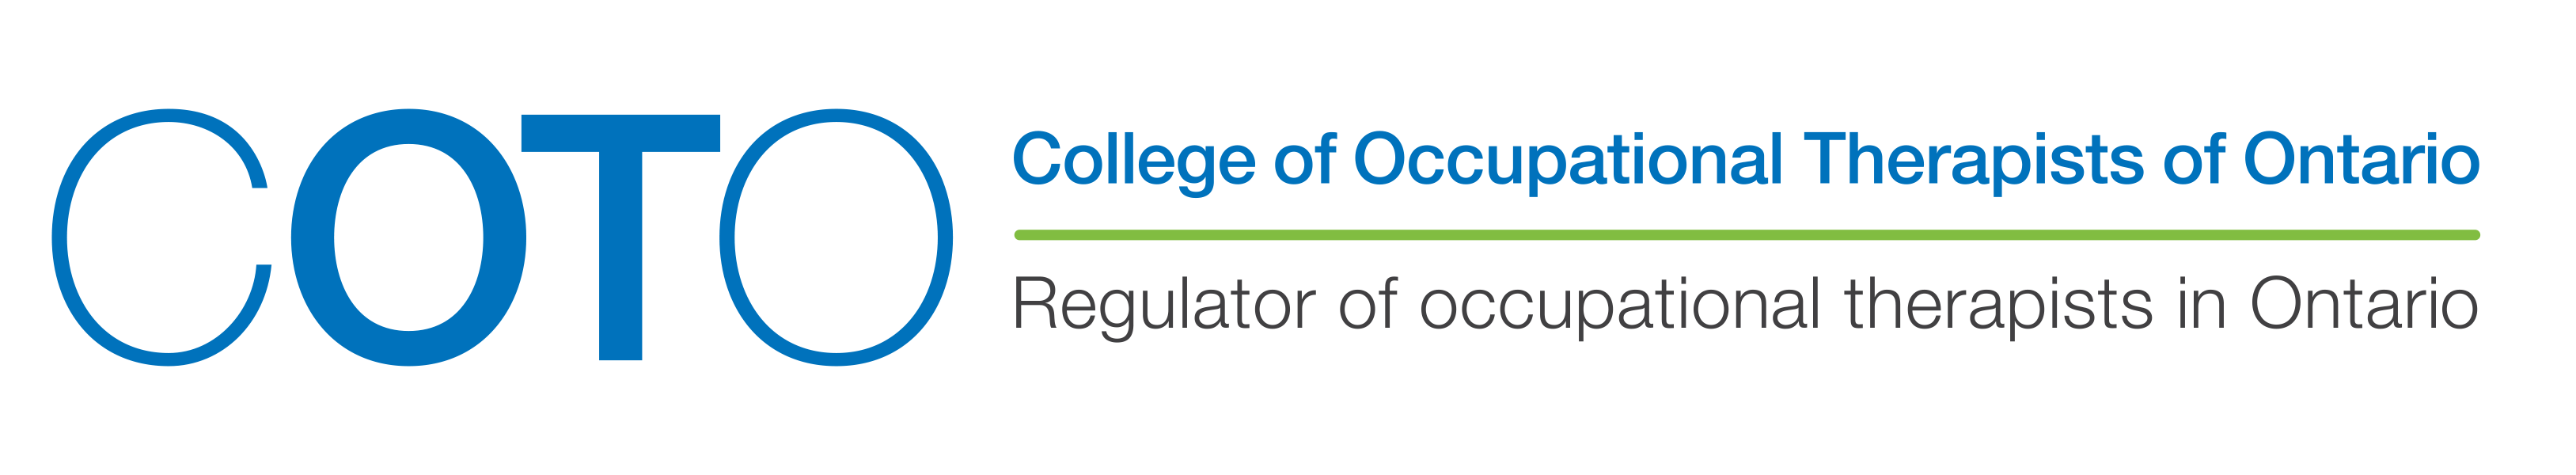 College of Occupational Therapists of Ontario Logo. Regulator of occupational therapists in Ontario.